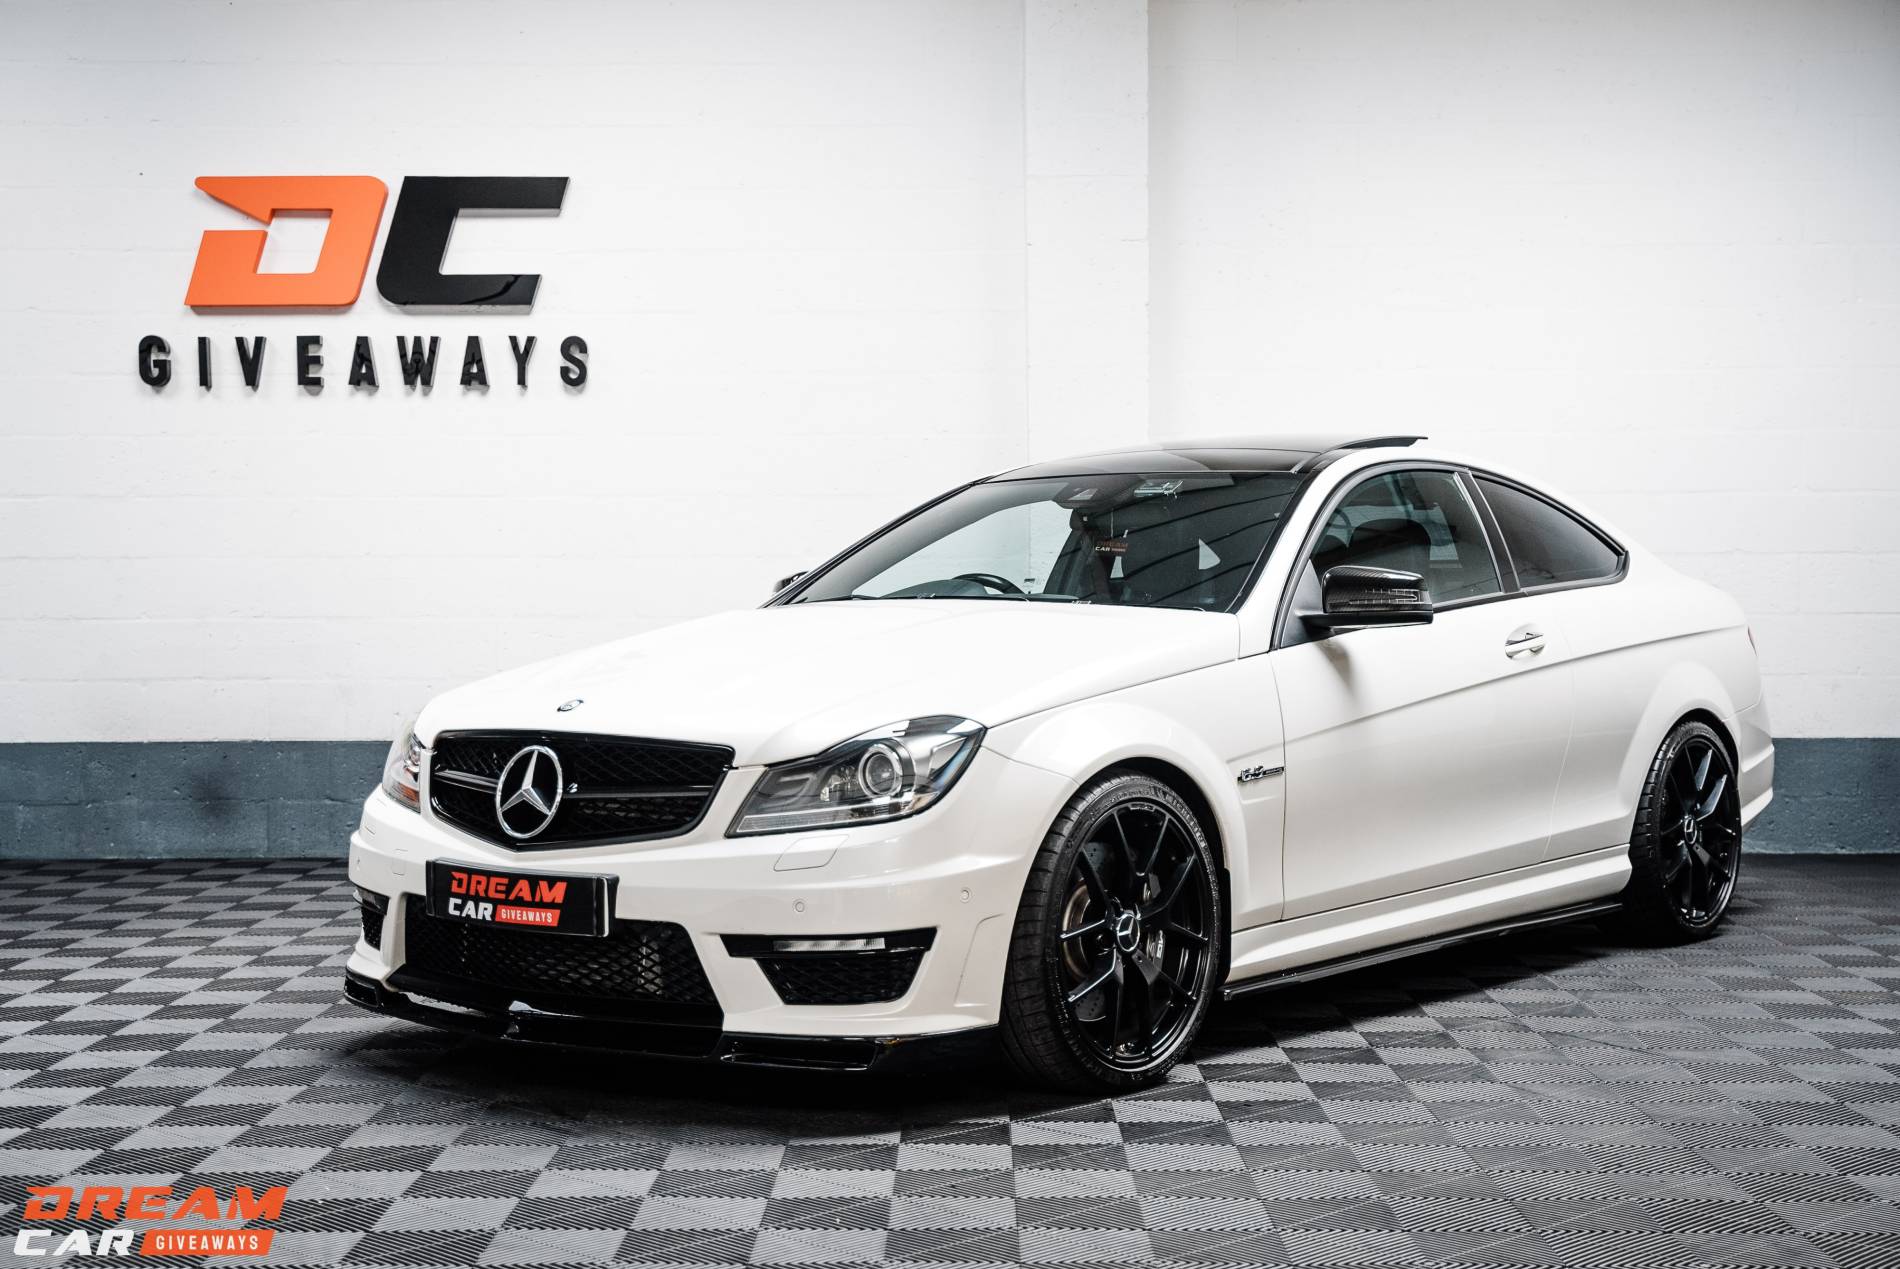 700HP Mercedes-Benz C63 AMG ESS Supercharged & £1,000 or £26,000 Tax Free